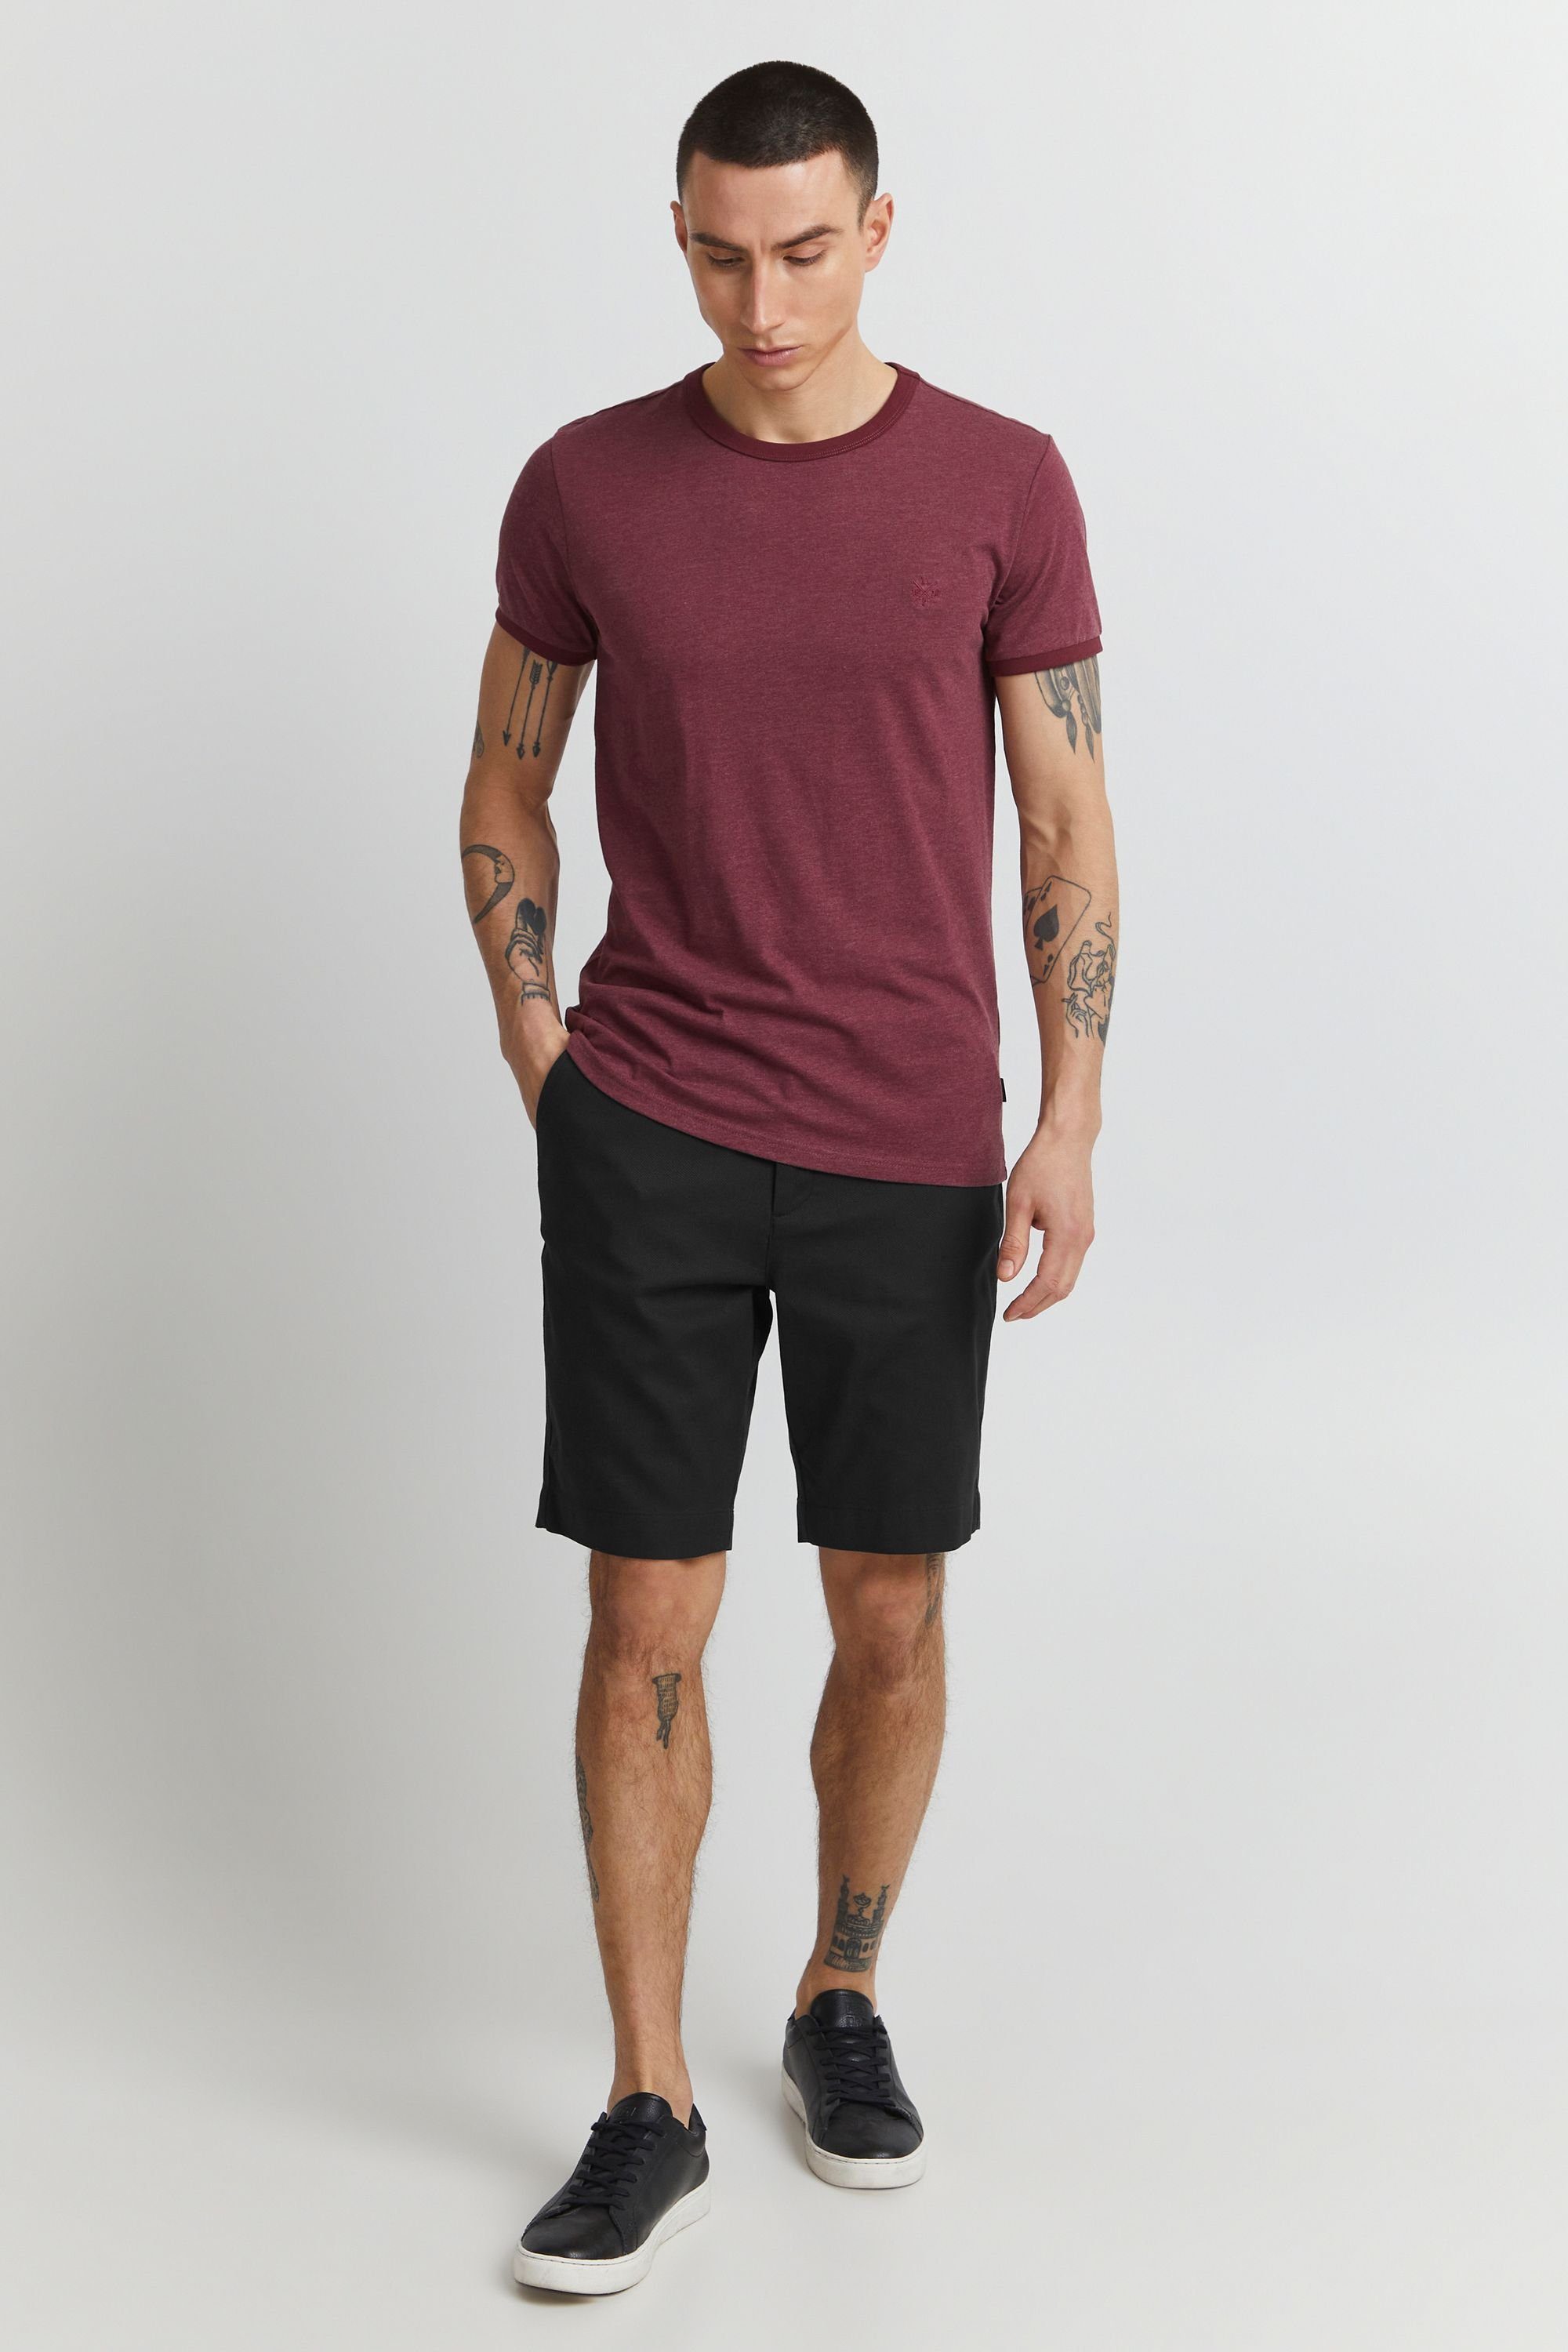 Solid Shorts Structure True (194008) Black SHO 21107204 SDFred 